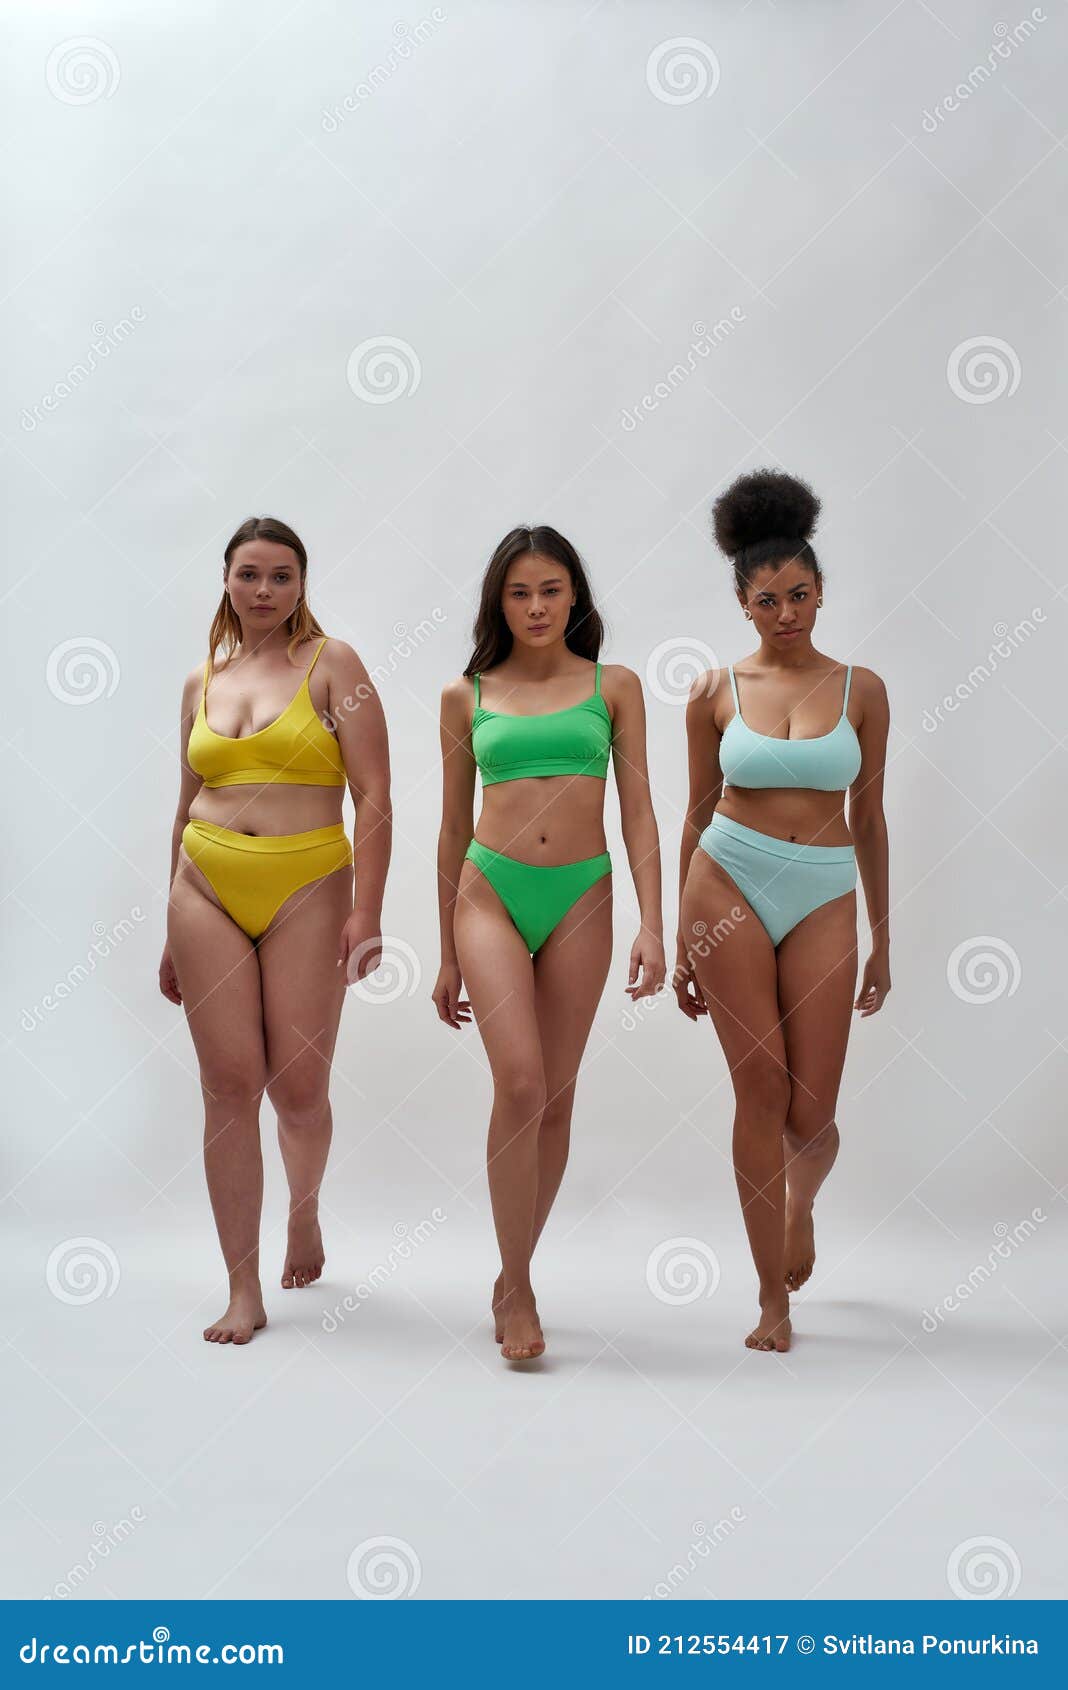 Full Length Shot Of Three Proud Diverse Women With, 60% OFF